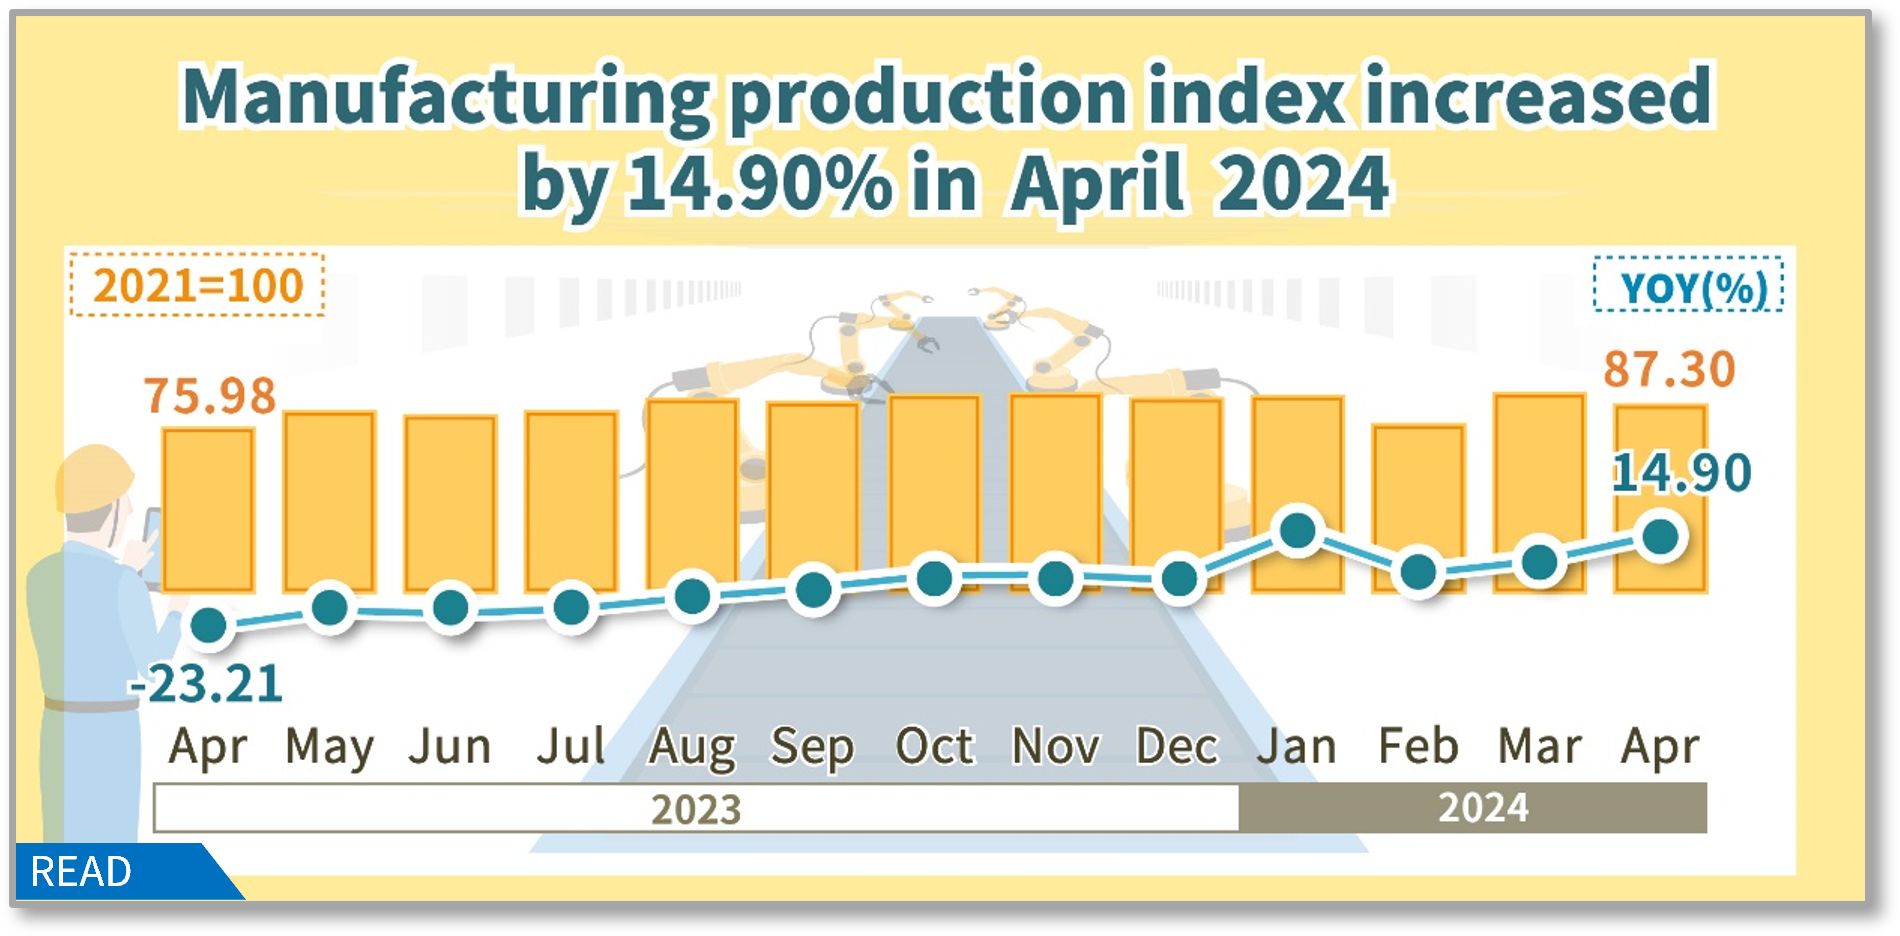 Manufacturing production index increased by 14.90% in April 2024